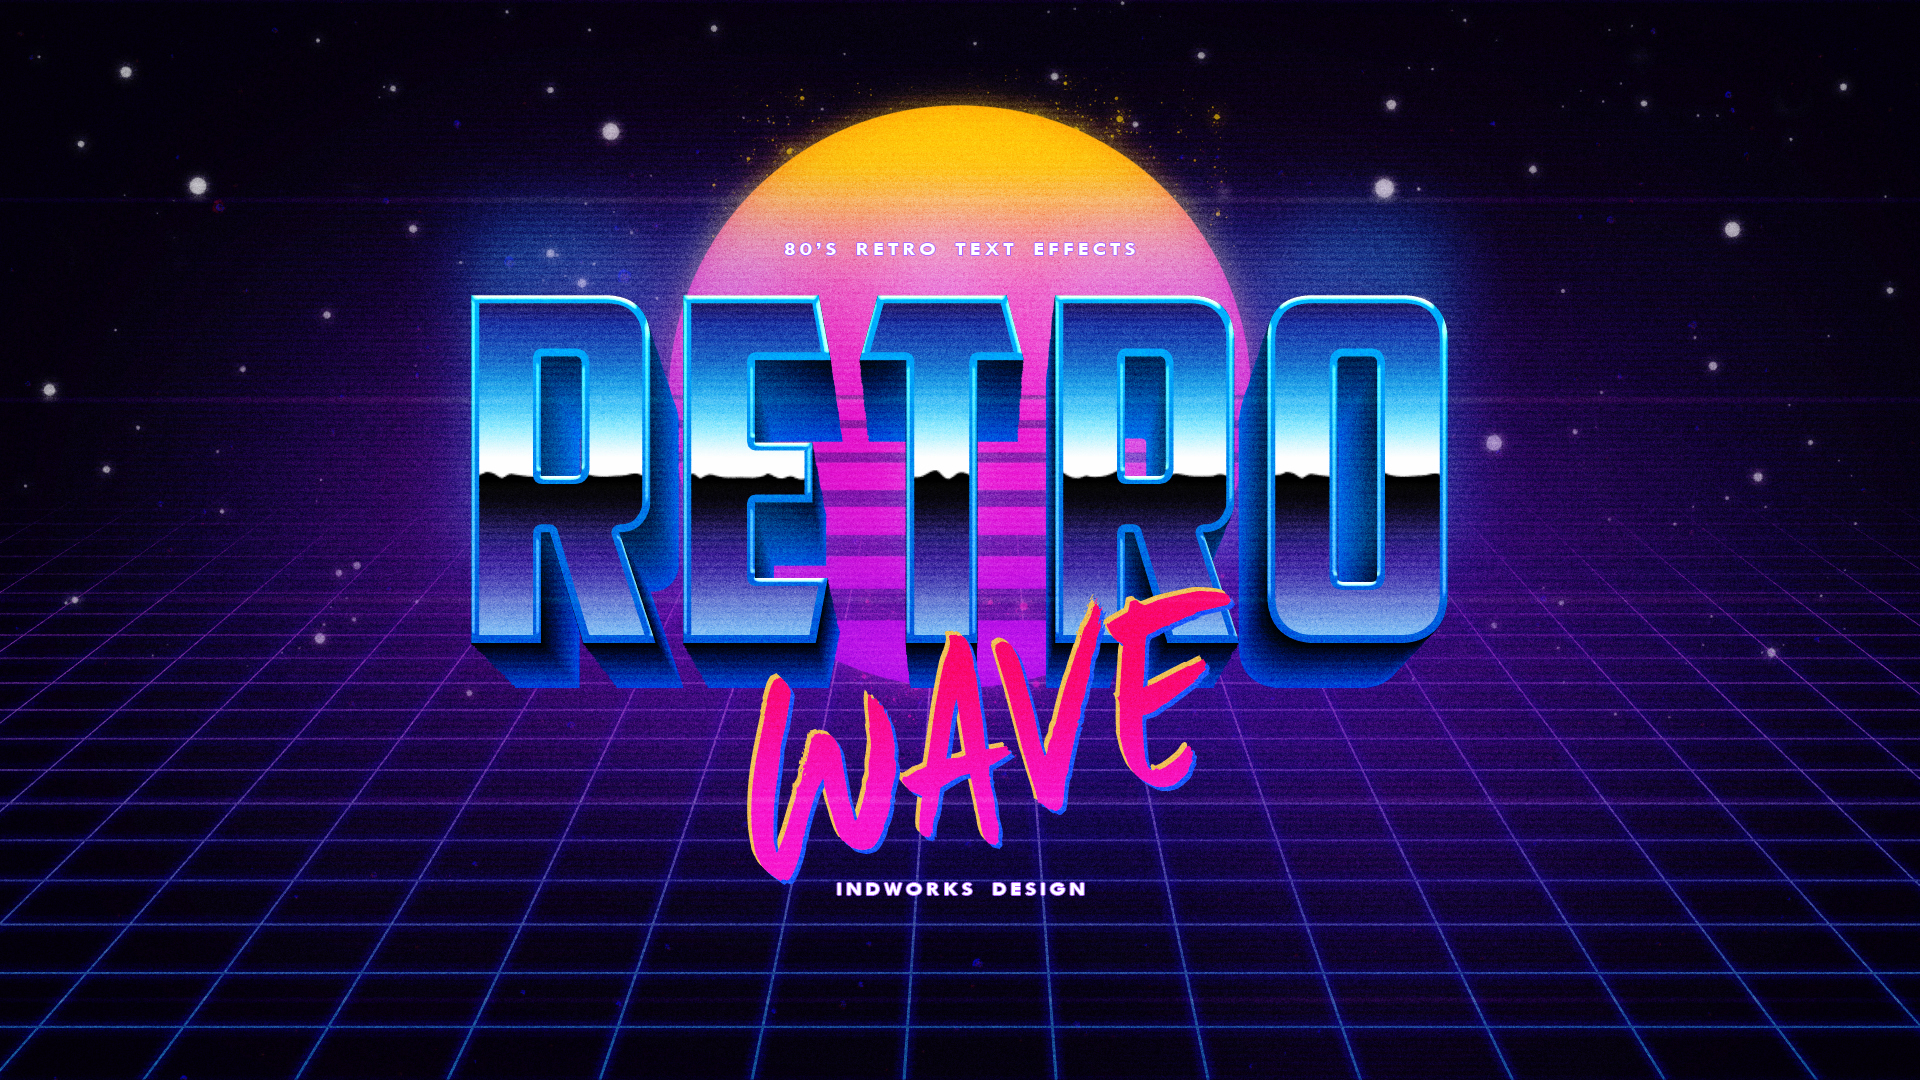 80's Retro Text Effects, Add-ons | GraphicRiver